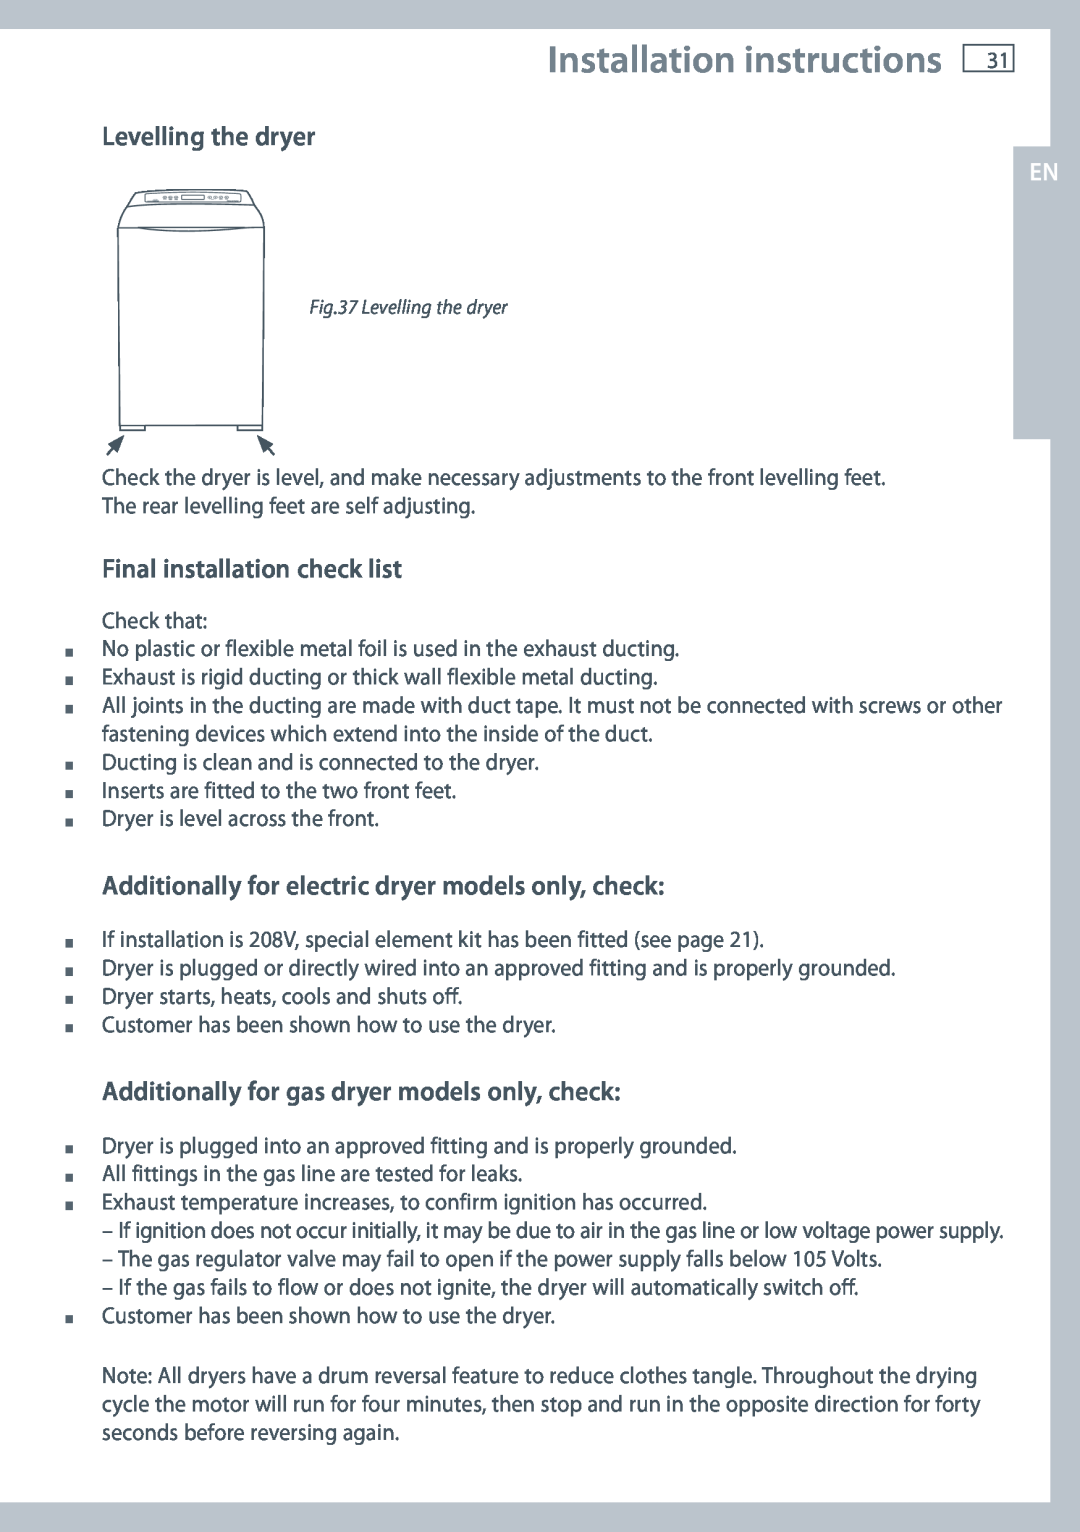 Fisher & Paykel DE62T27C, DG62T27C Installation instructions, Levelling the dryer, Final installation check list 